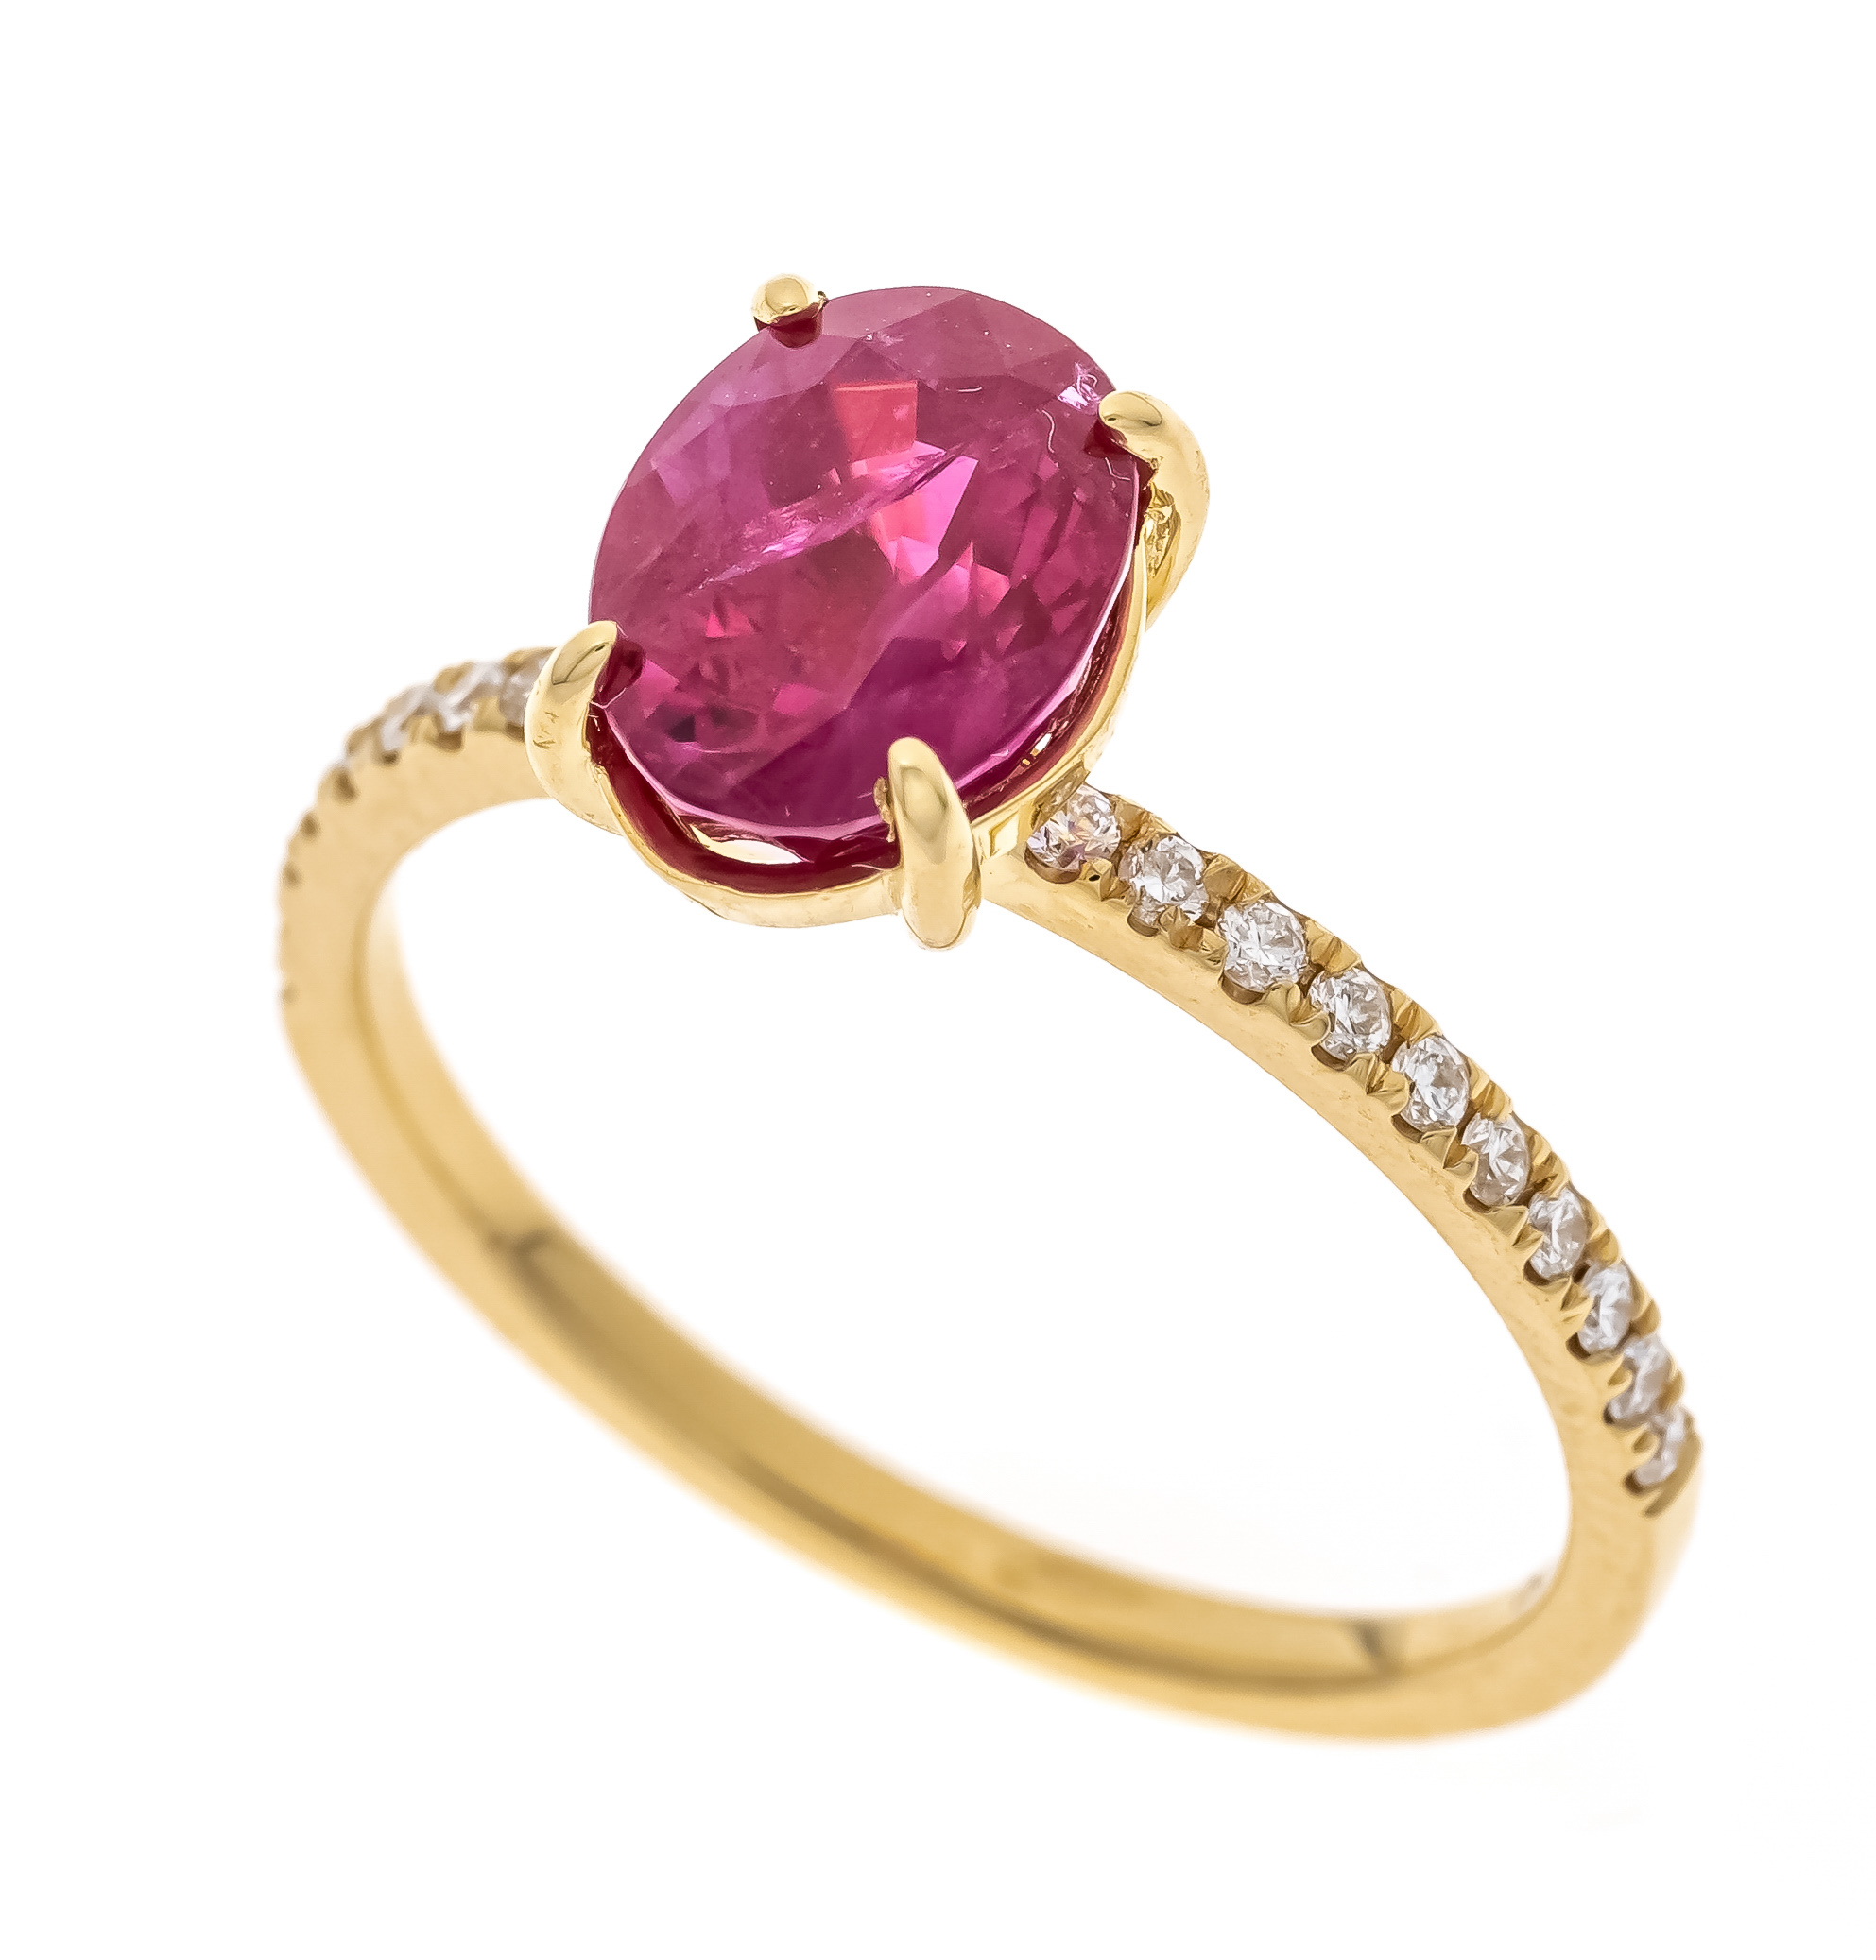 Burma ruby brilliant ring GG 750/000 with one oval faceted Burma ruby 2,50 ct bright red,